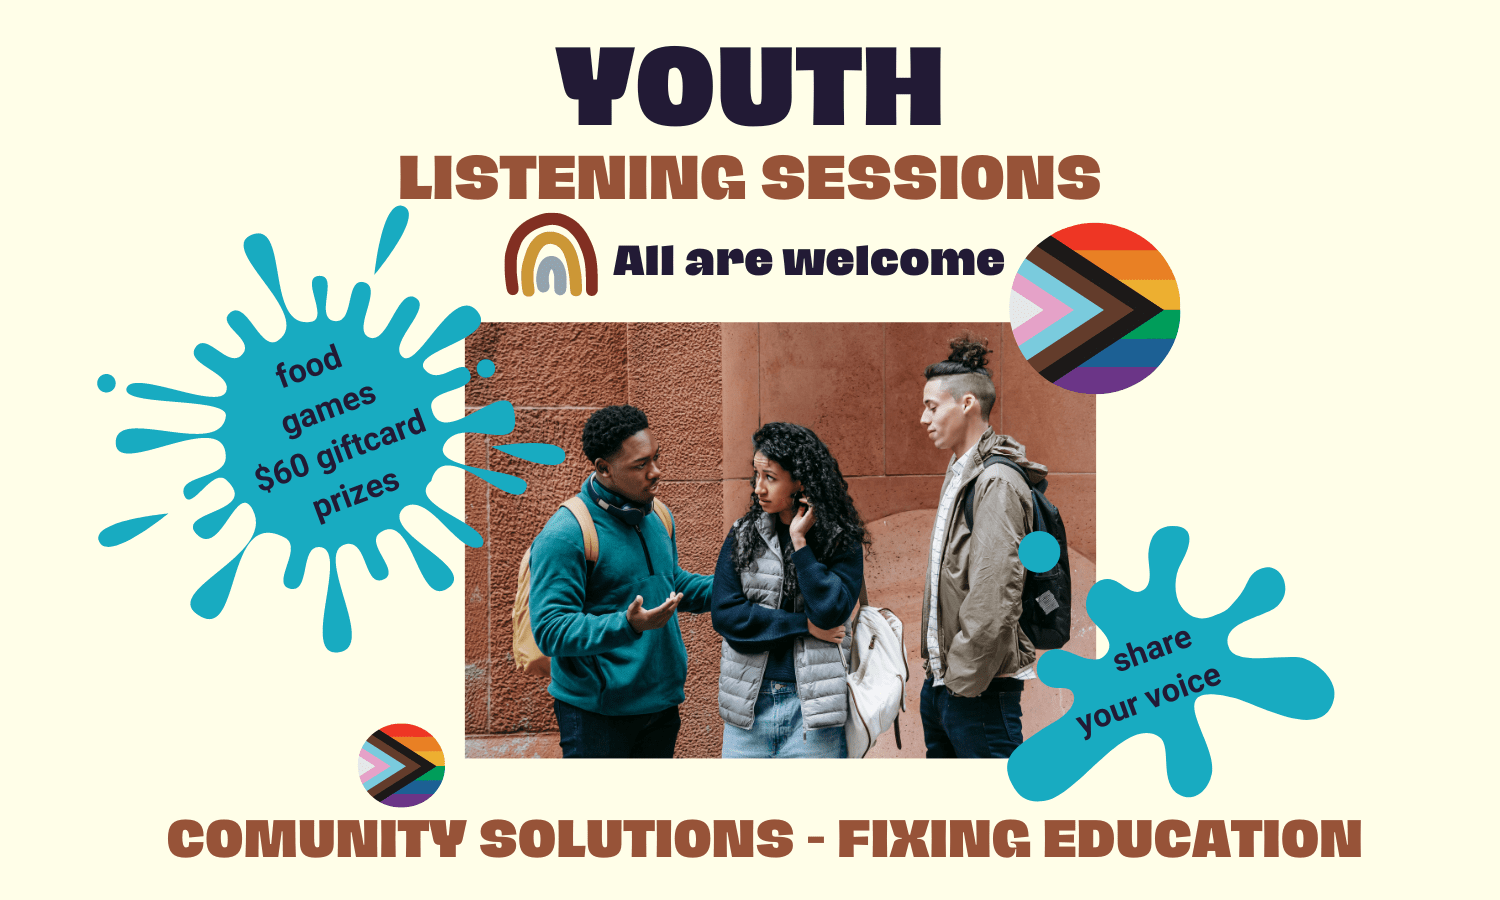 Photo of 3 young people in school. Text reads: Youth Listening Session – All Are Welcome - Community Solutions – Fixing Education. First splash of turquoise color contains this text: food / games / $60 giftcards / prizes. Second splash of color says: share your voice.